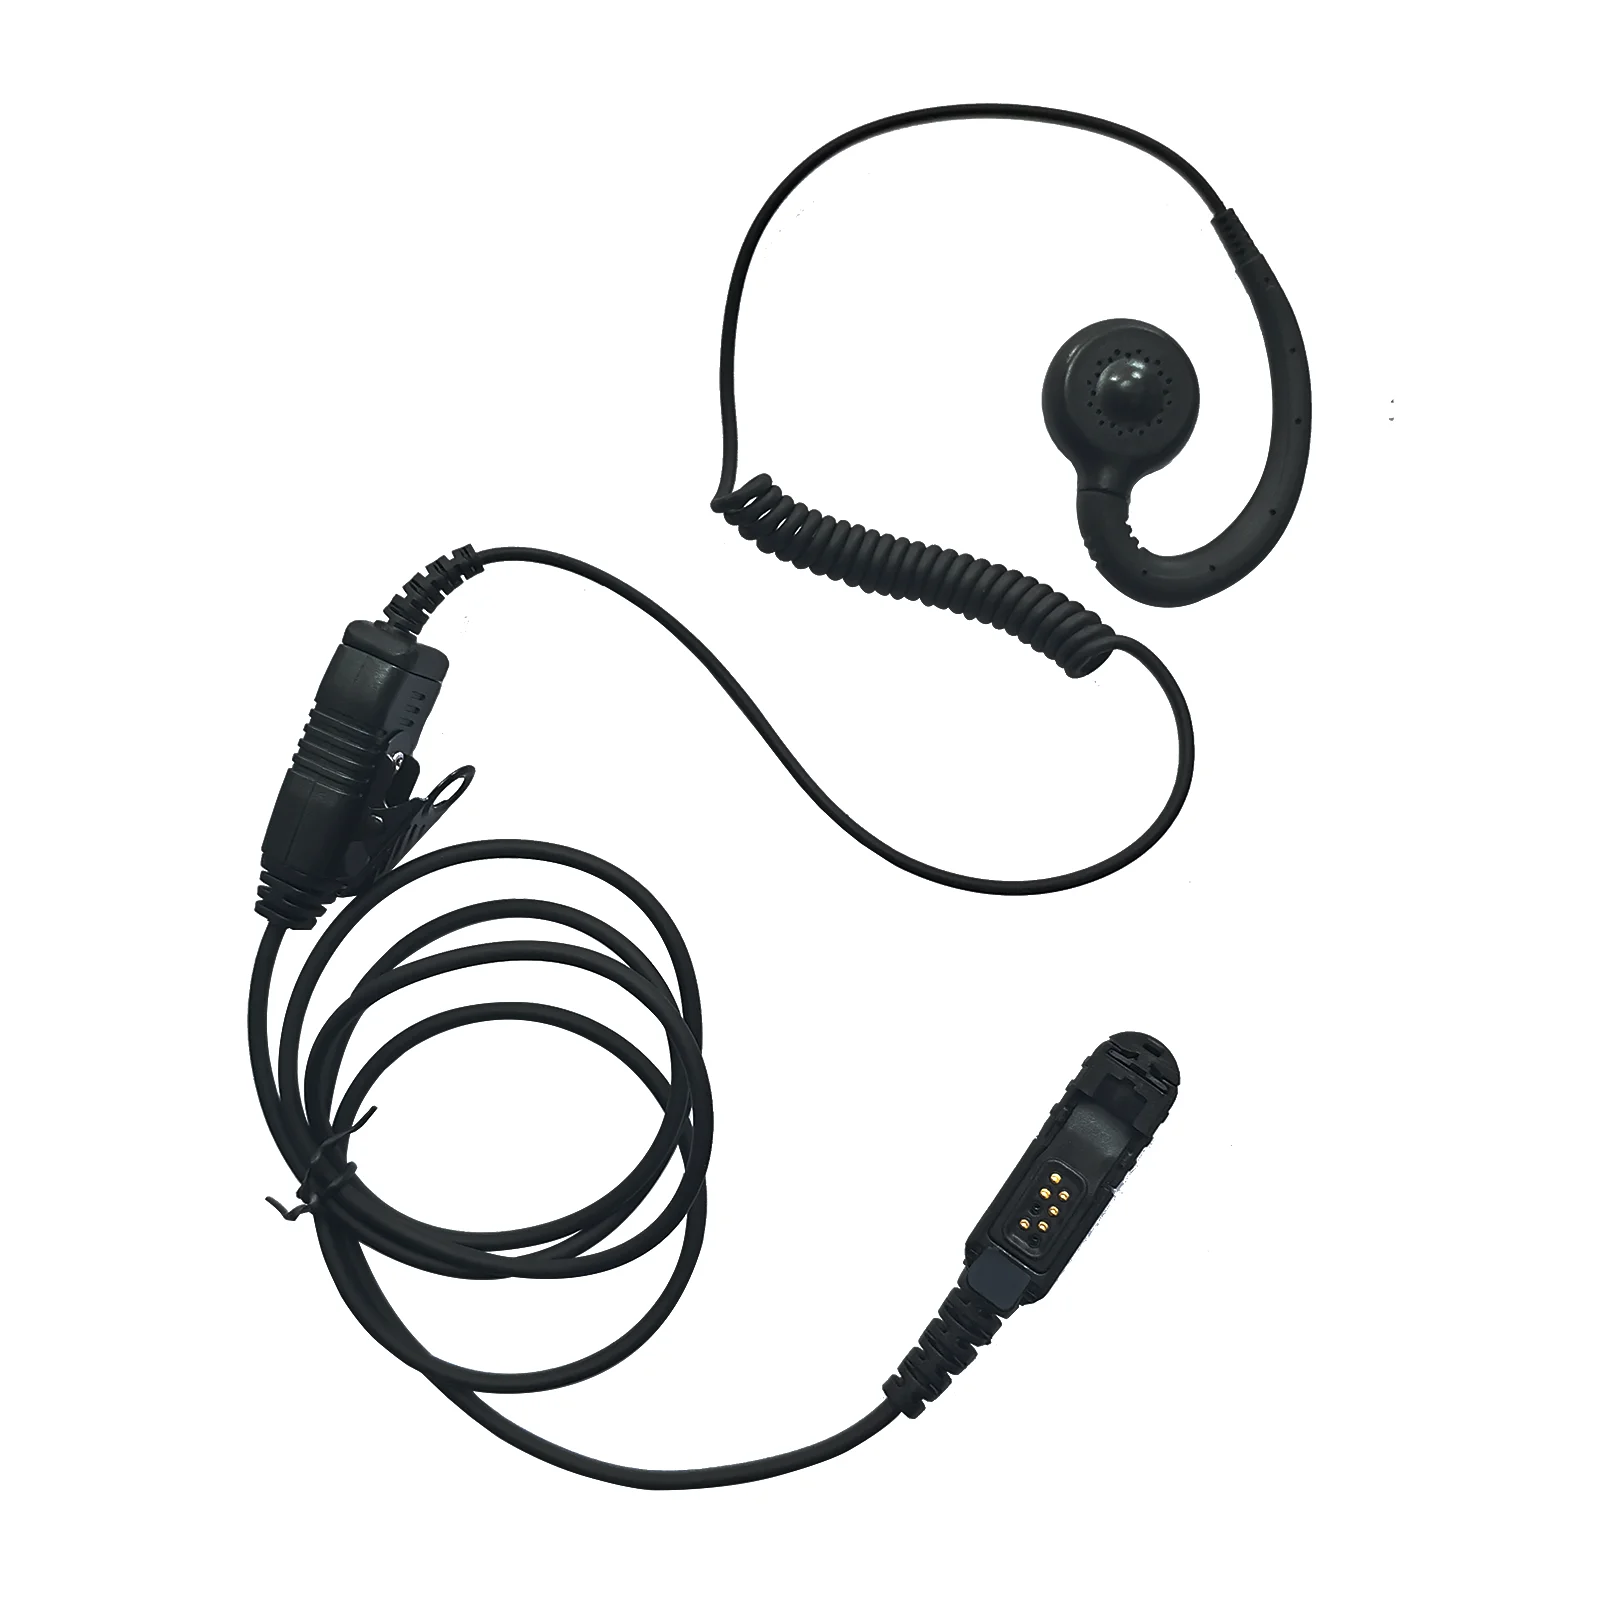 

C Shape Earpiece Walkie Talkie with MIC and PTT Acoustic Tube Headset for Motorola XPR3300e XPR3500e XPR3300 XPR3500 Radio